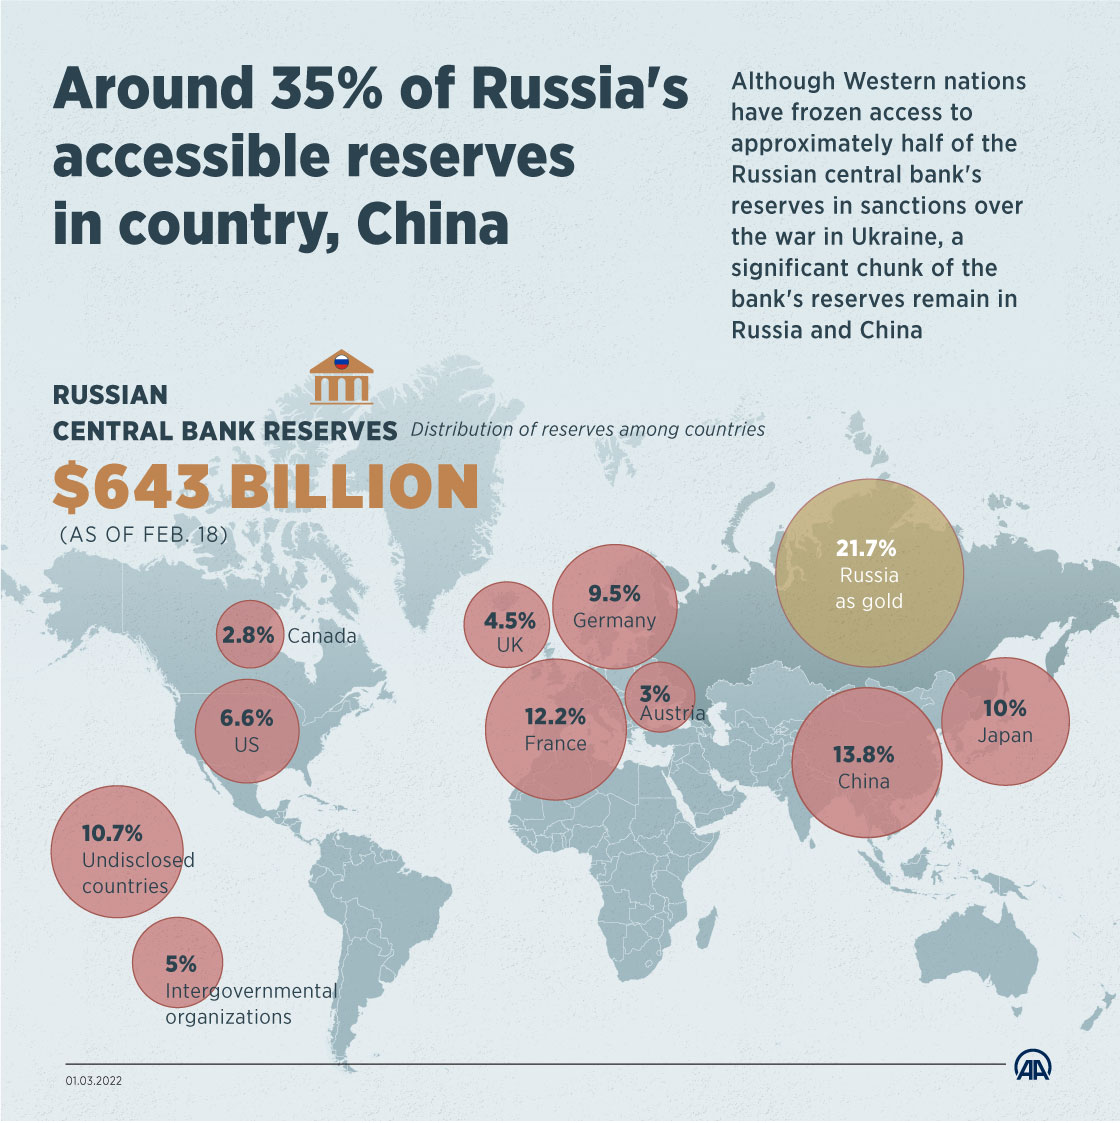 Around 35% of Russia's accessible reserves in country, China